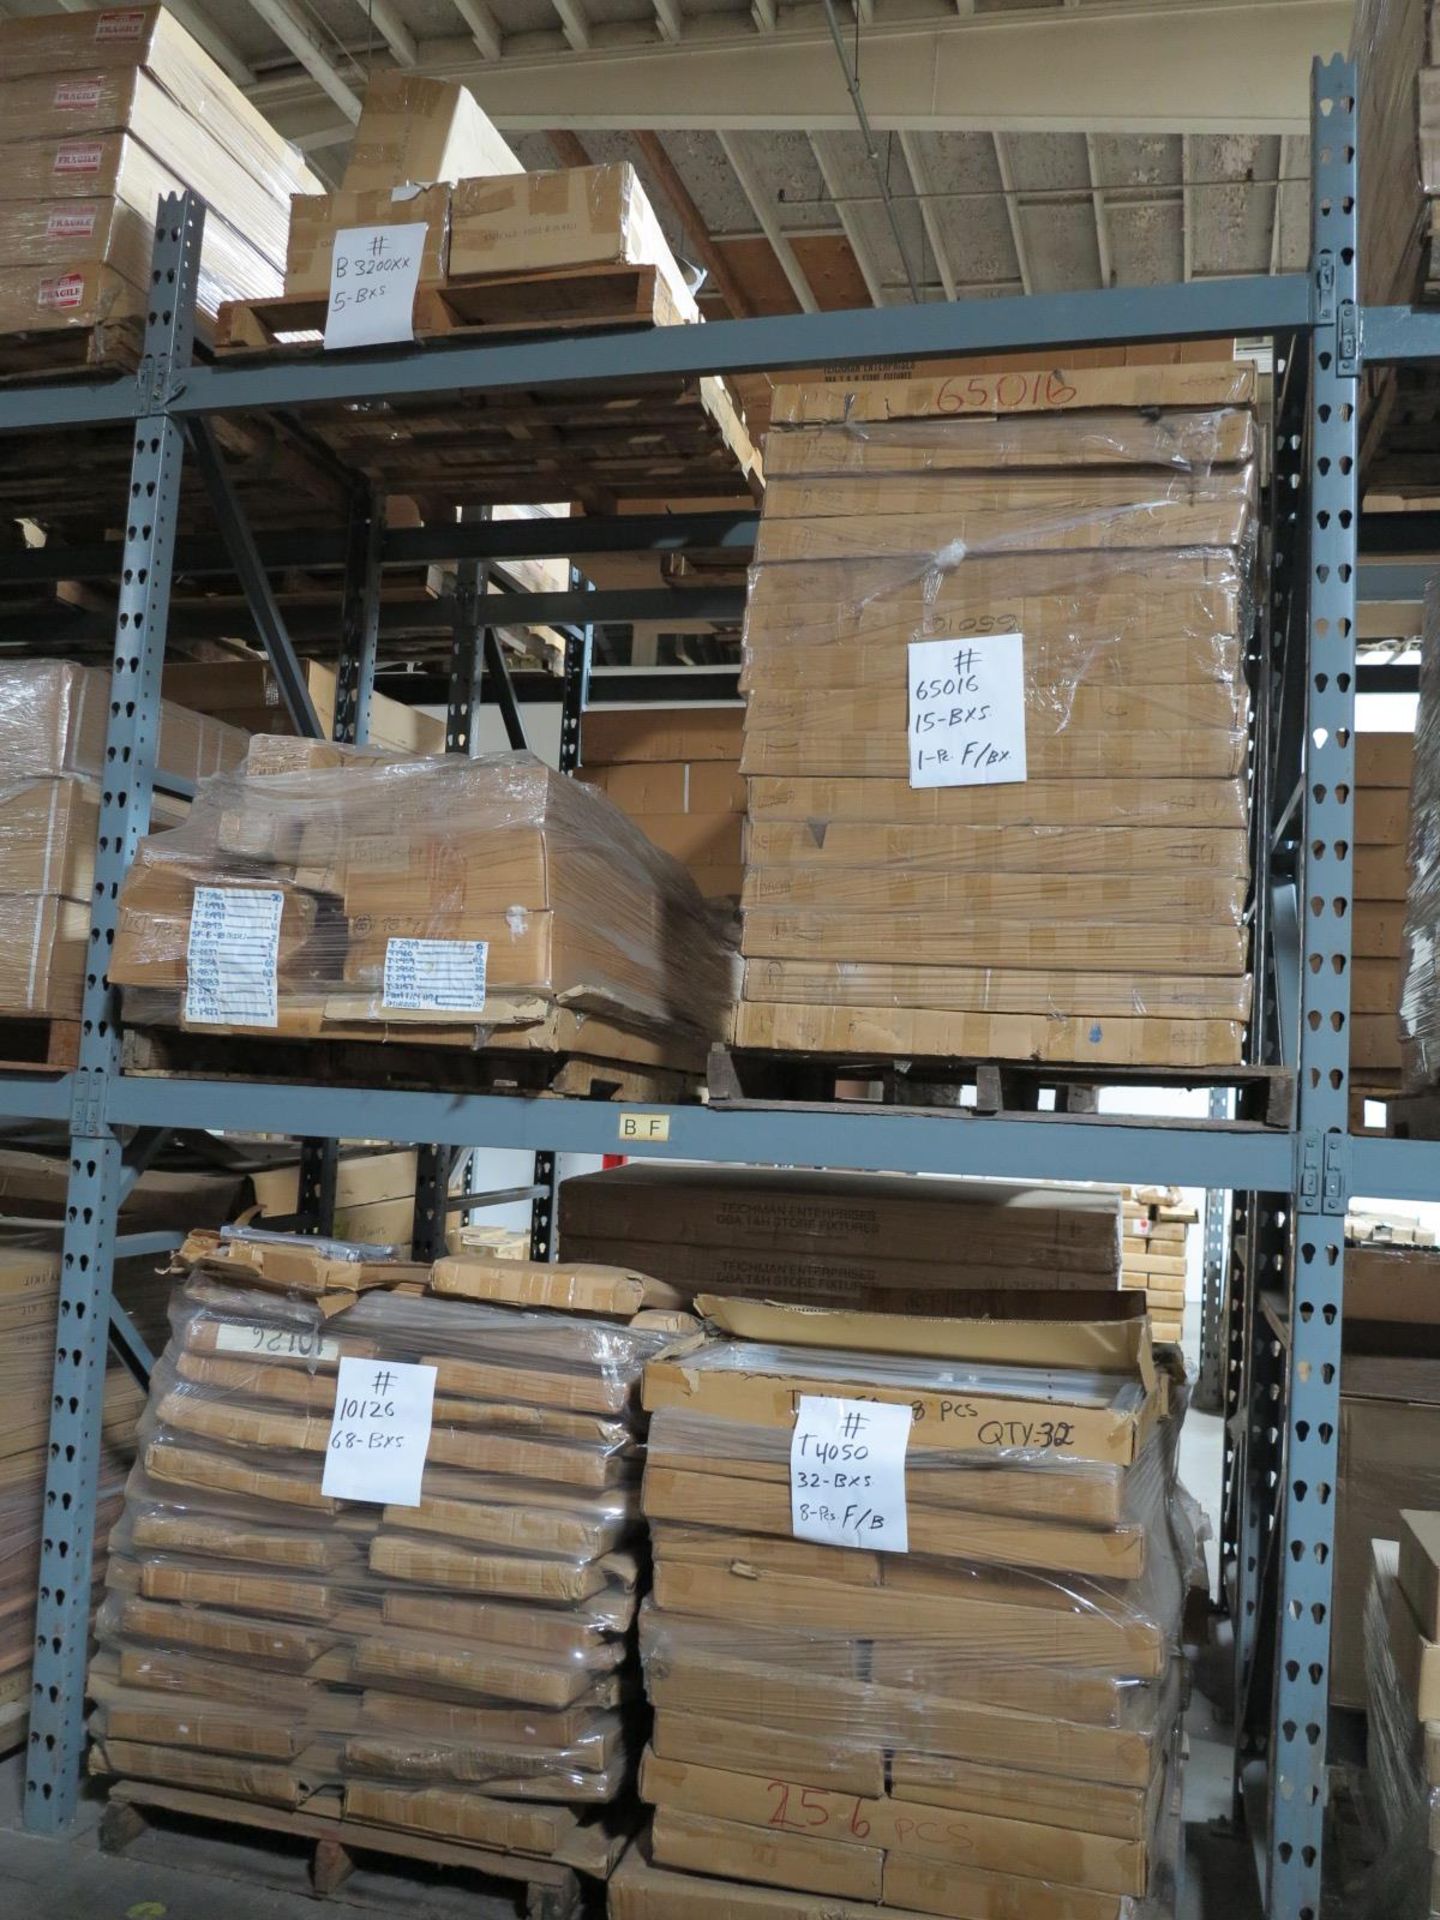 LOT - CONTENTS OF (3) SECTIONS OF PALLET RACK TO INCLUDE: ITEM # 10126, 2 WAY W (2) 16" STR. ARMS, - Bild 2 aus 12